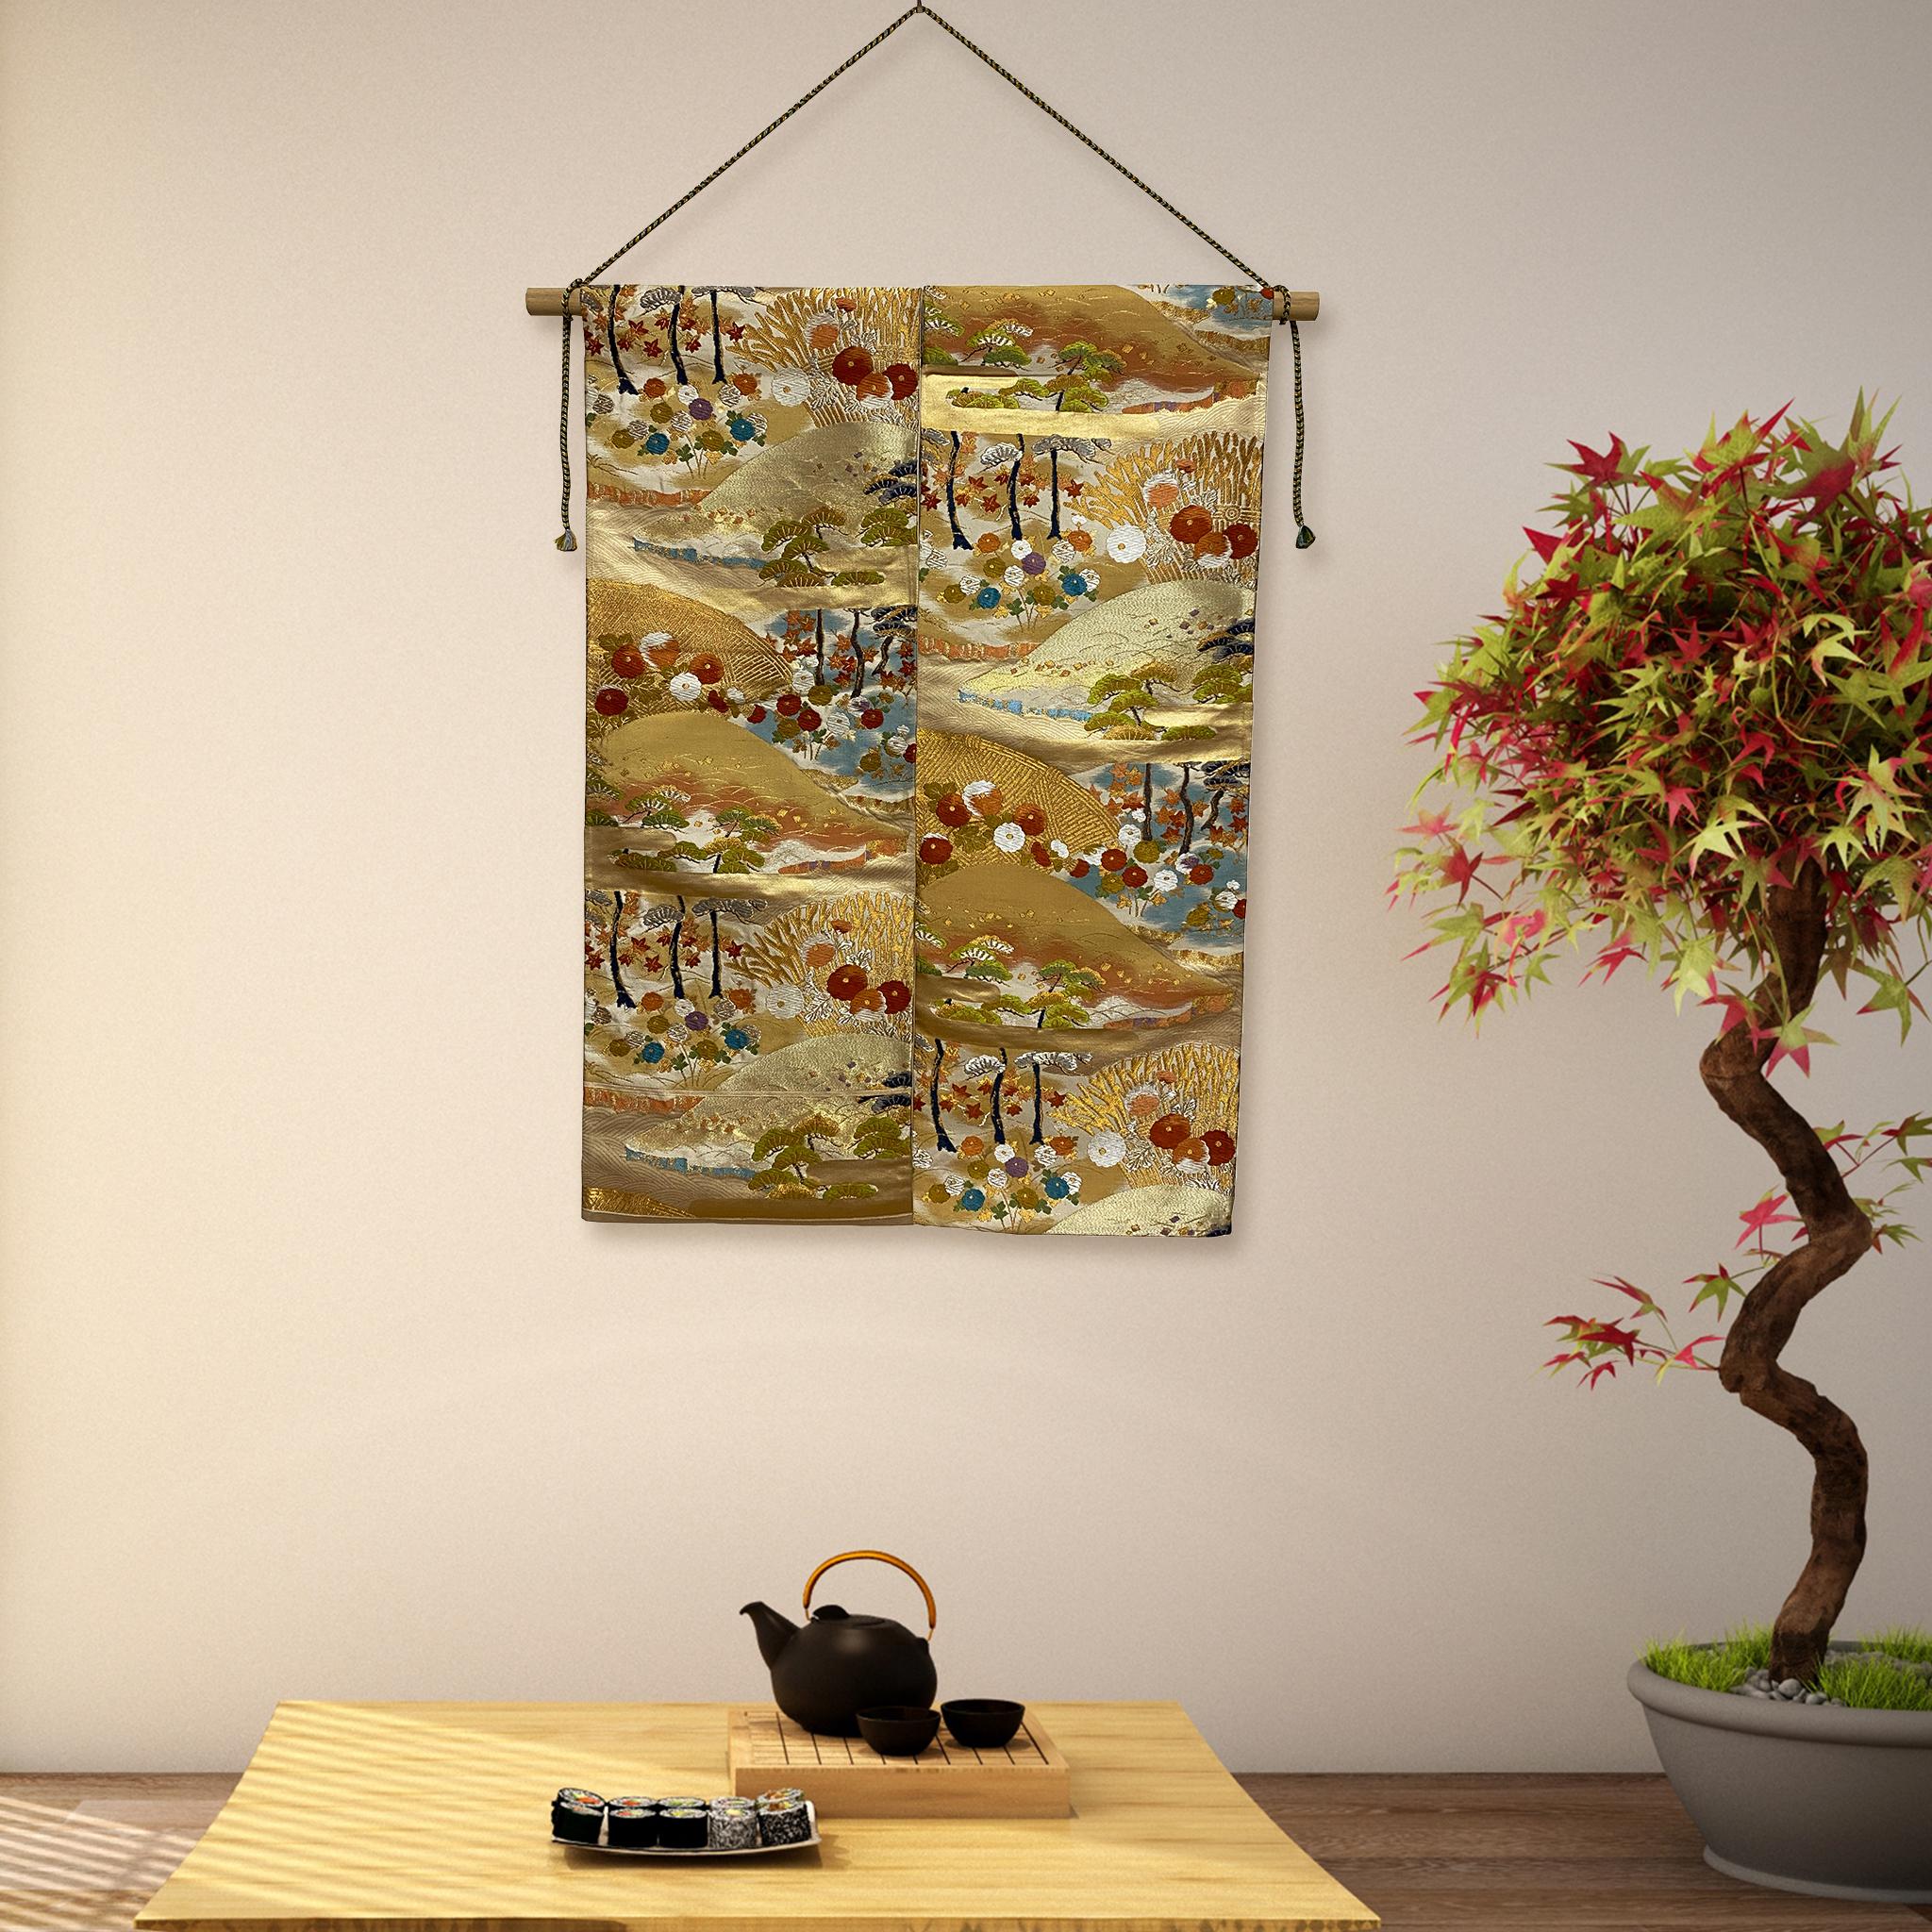 Garden by the Sea by Kimono-Couture

*Japanese Kimono Art
*Handmade by Kimono-Couture
*One-of-a-kind Japanese Art

This work is a tapestry of high quality kimono obi made by skilled Japanese craftsmen and repurposed as Art without compromising its